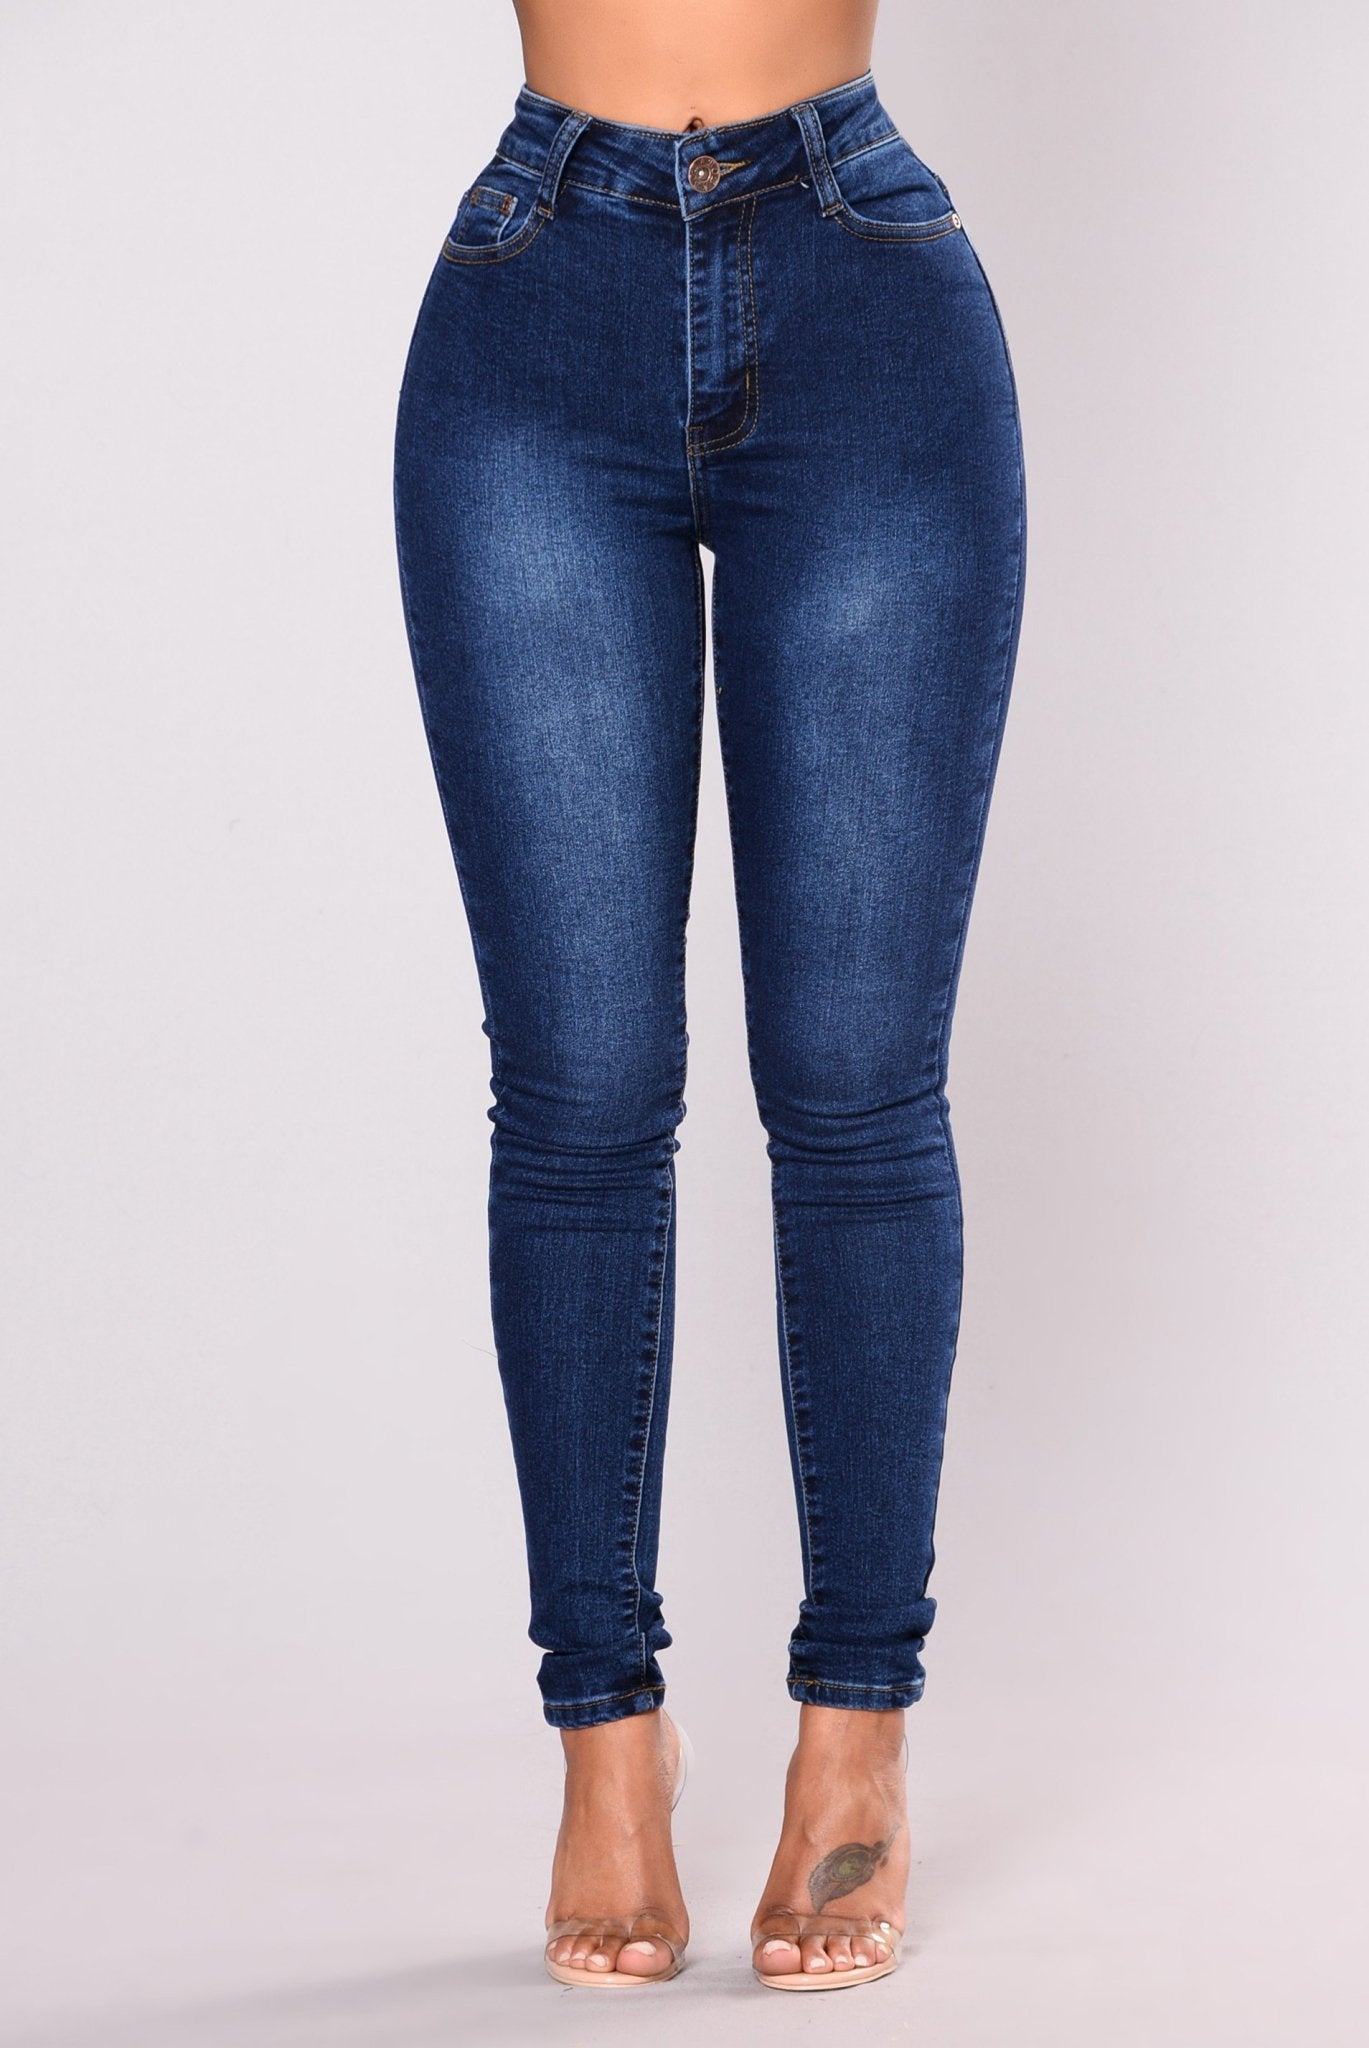 Supernatural High Rise Jeans - Dark Wash - Jeans - INS | Online Fashion Free Shipping Clothing, Dresses, Tops, Shoes - 5stars - Back 06-23-18 - Back in Stock